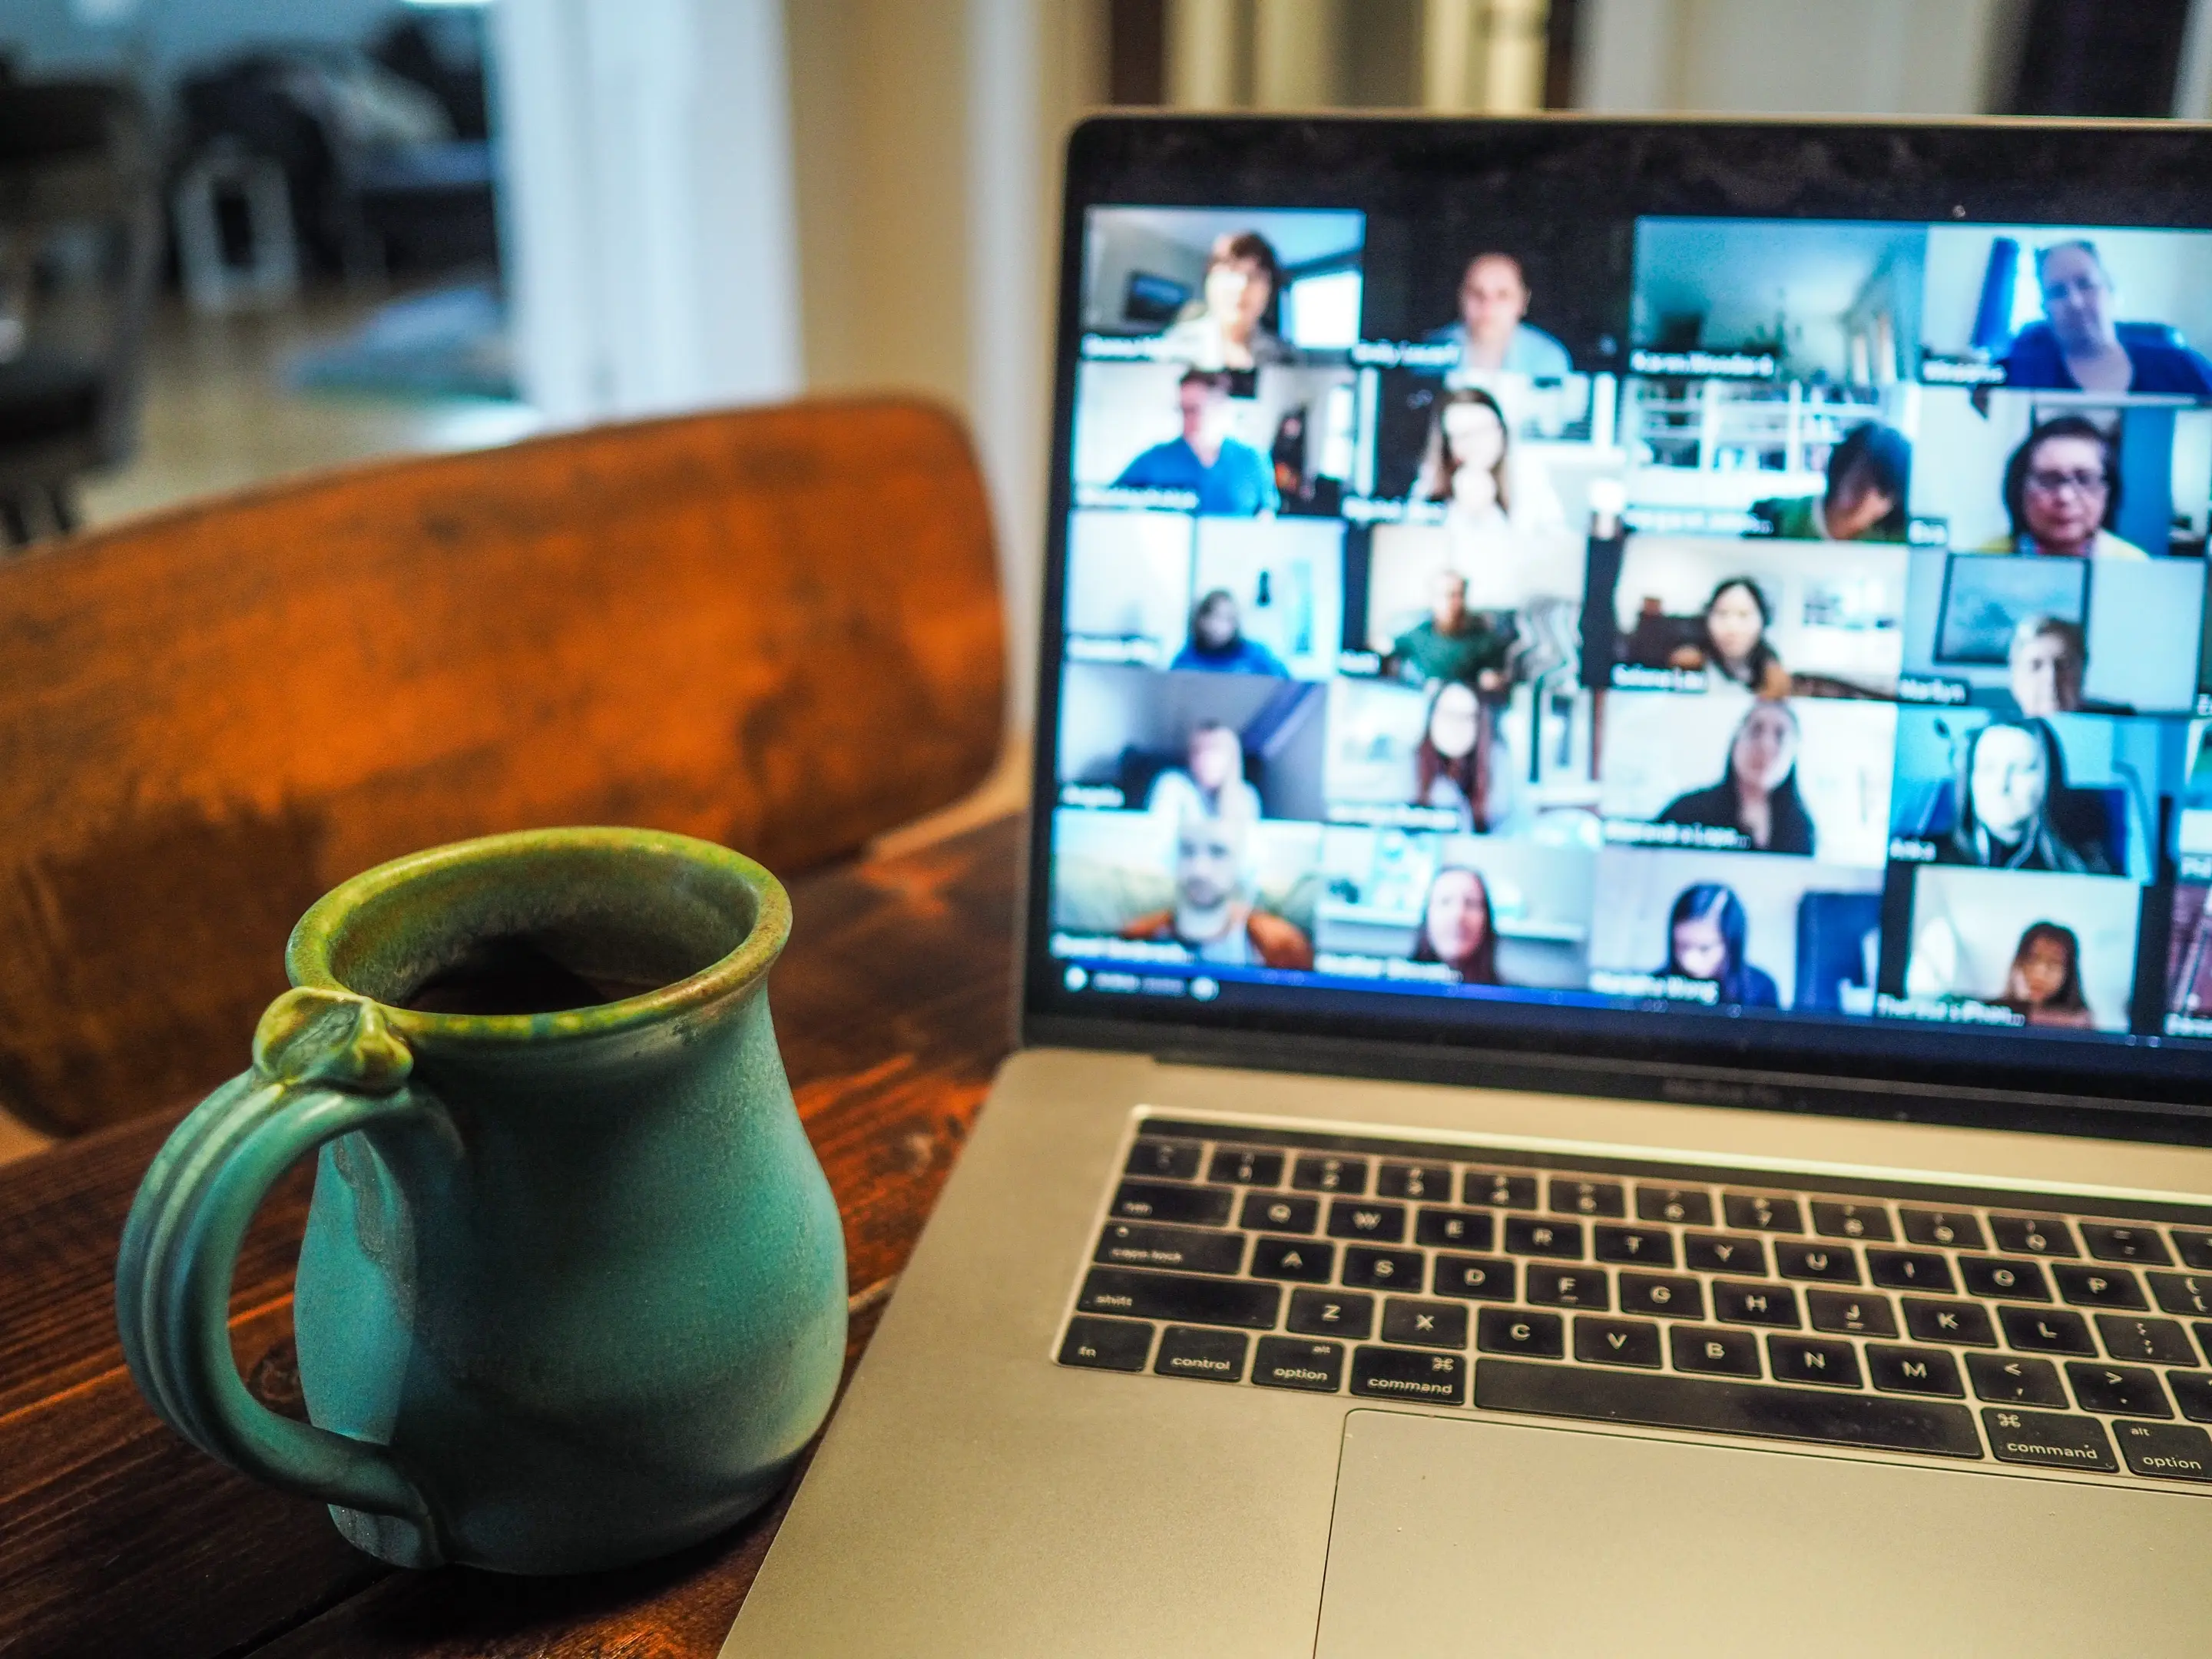 A mug next to an open laptop showing participants of a video meeting